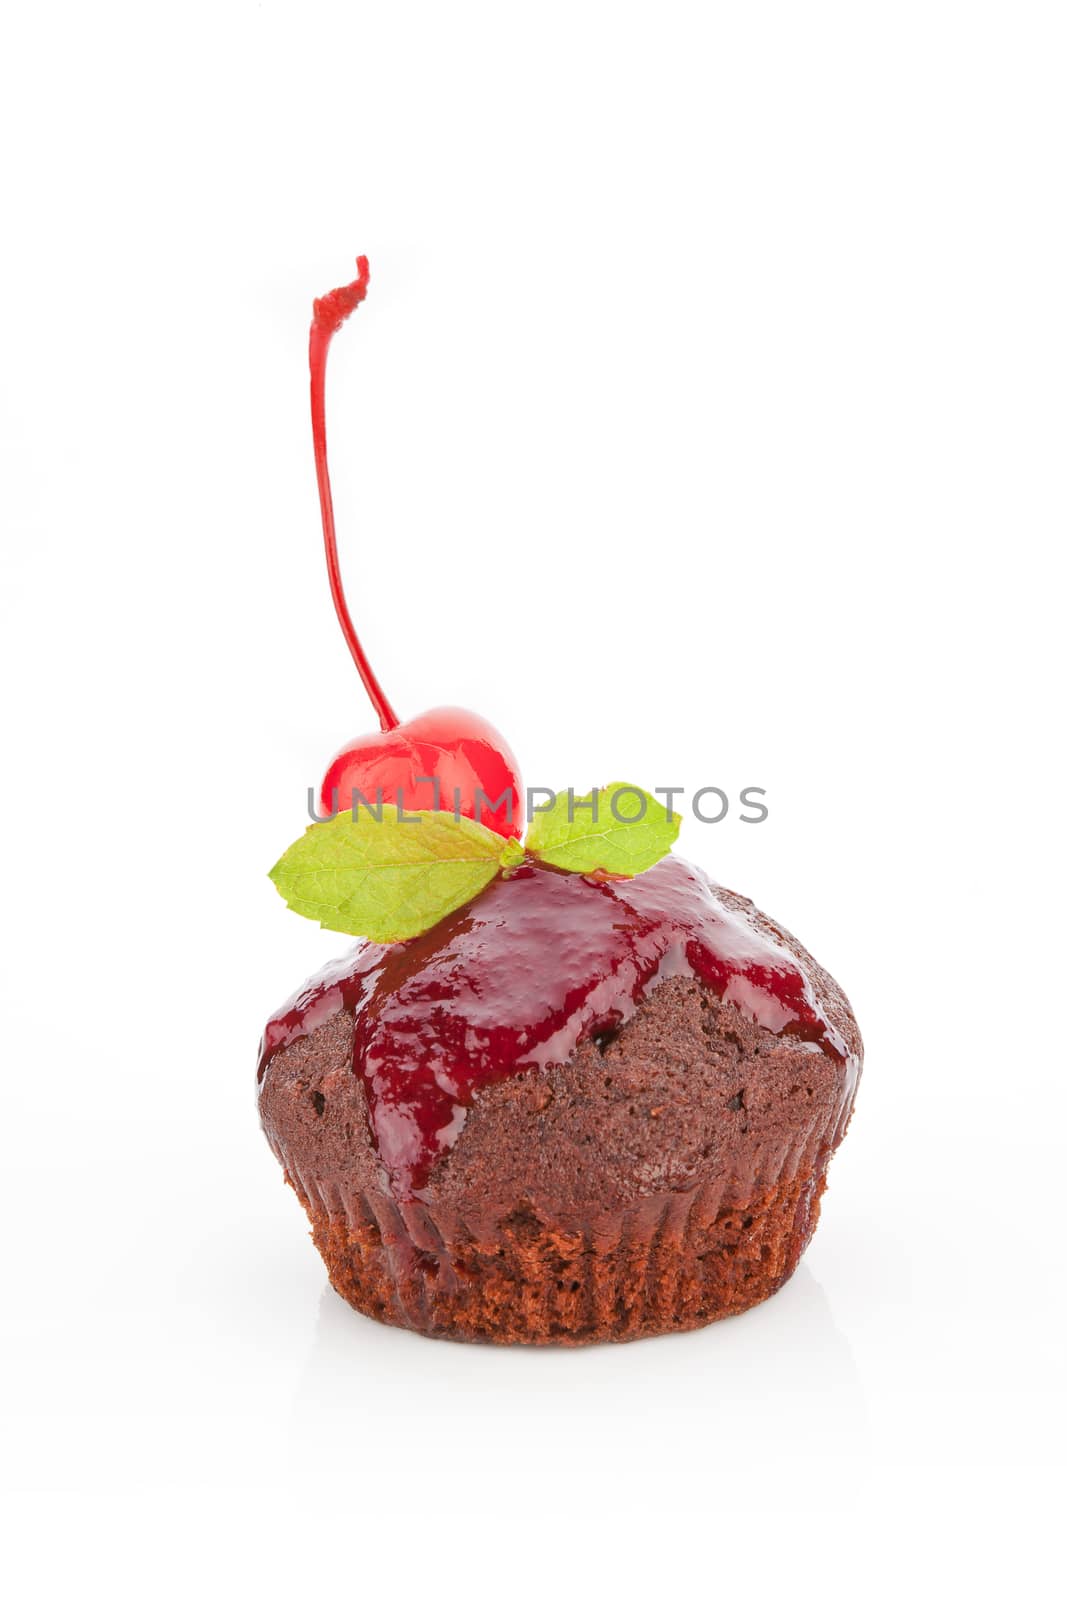 Delicious chocolate muffin with jam. by eskymaks